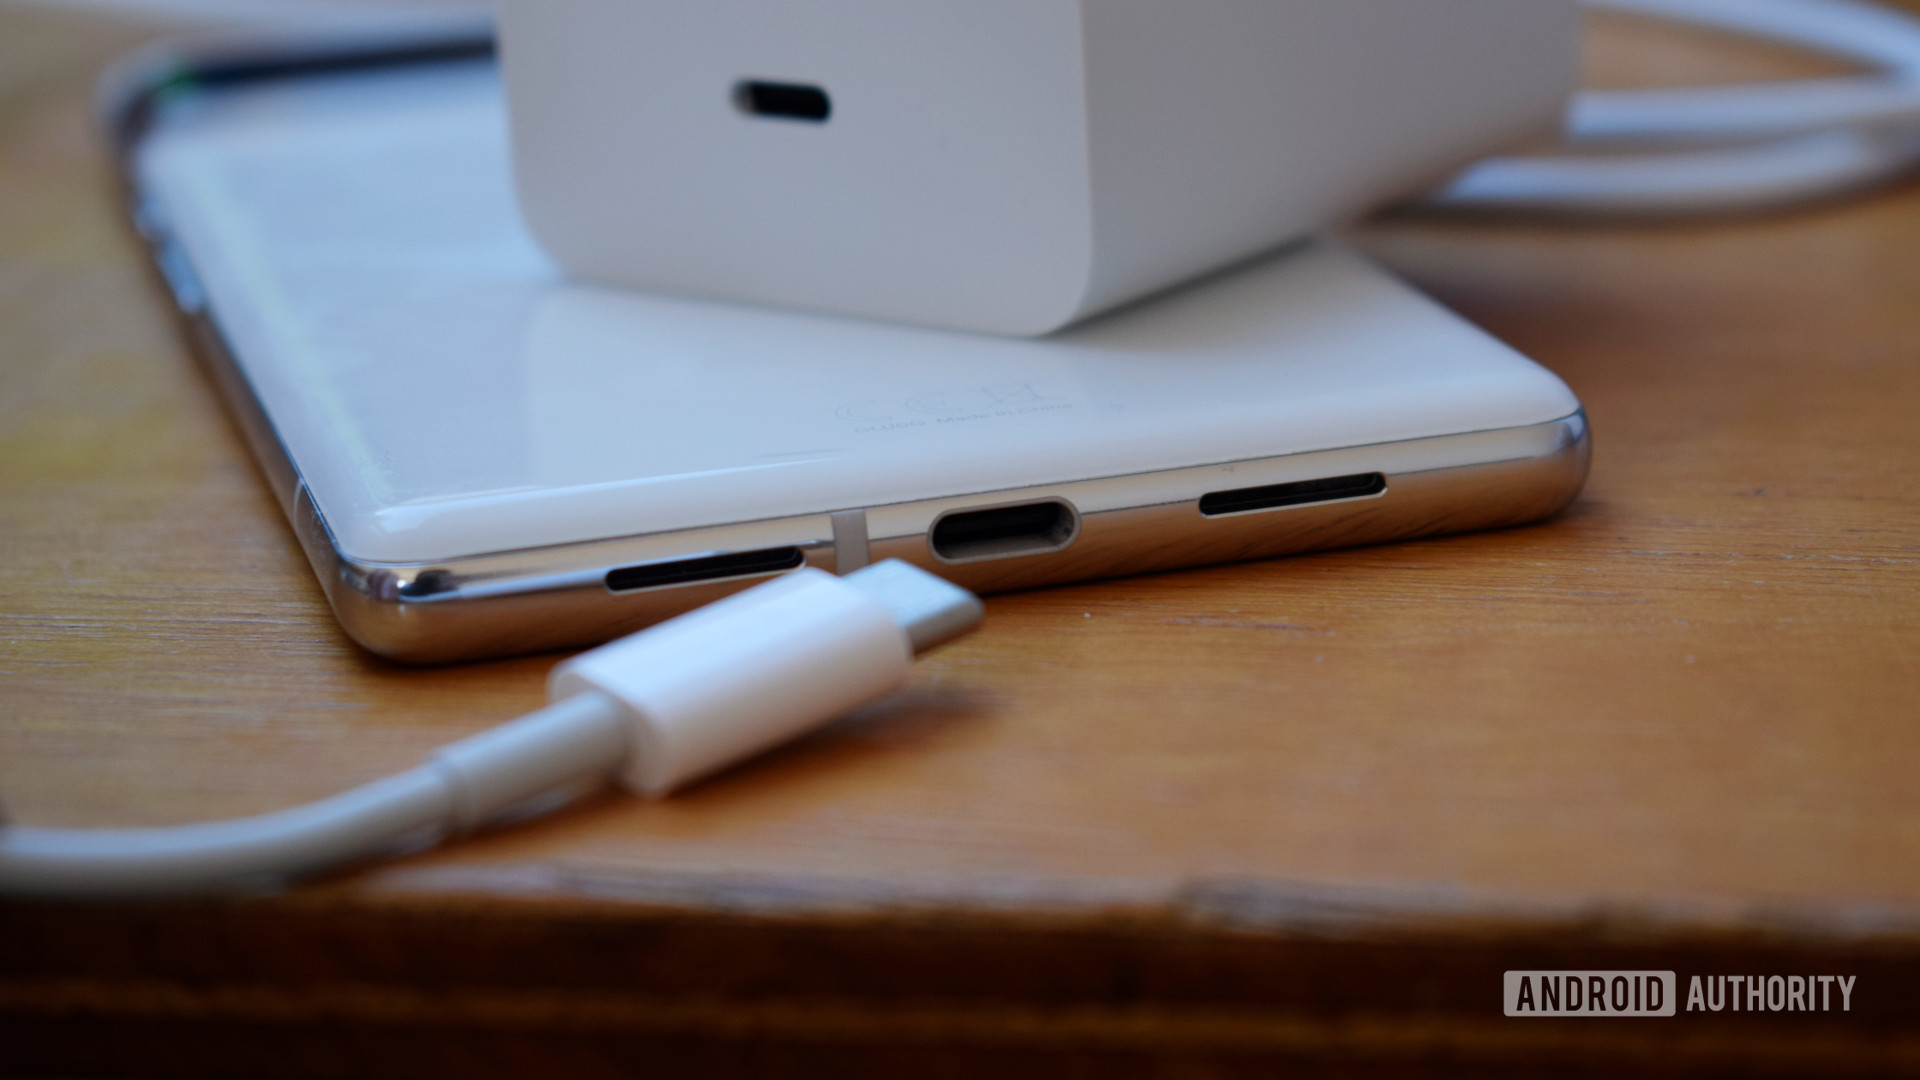 Google Pixel 6 Pro face down on desk next to USB-C charging cable